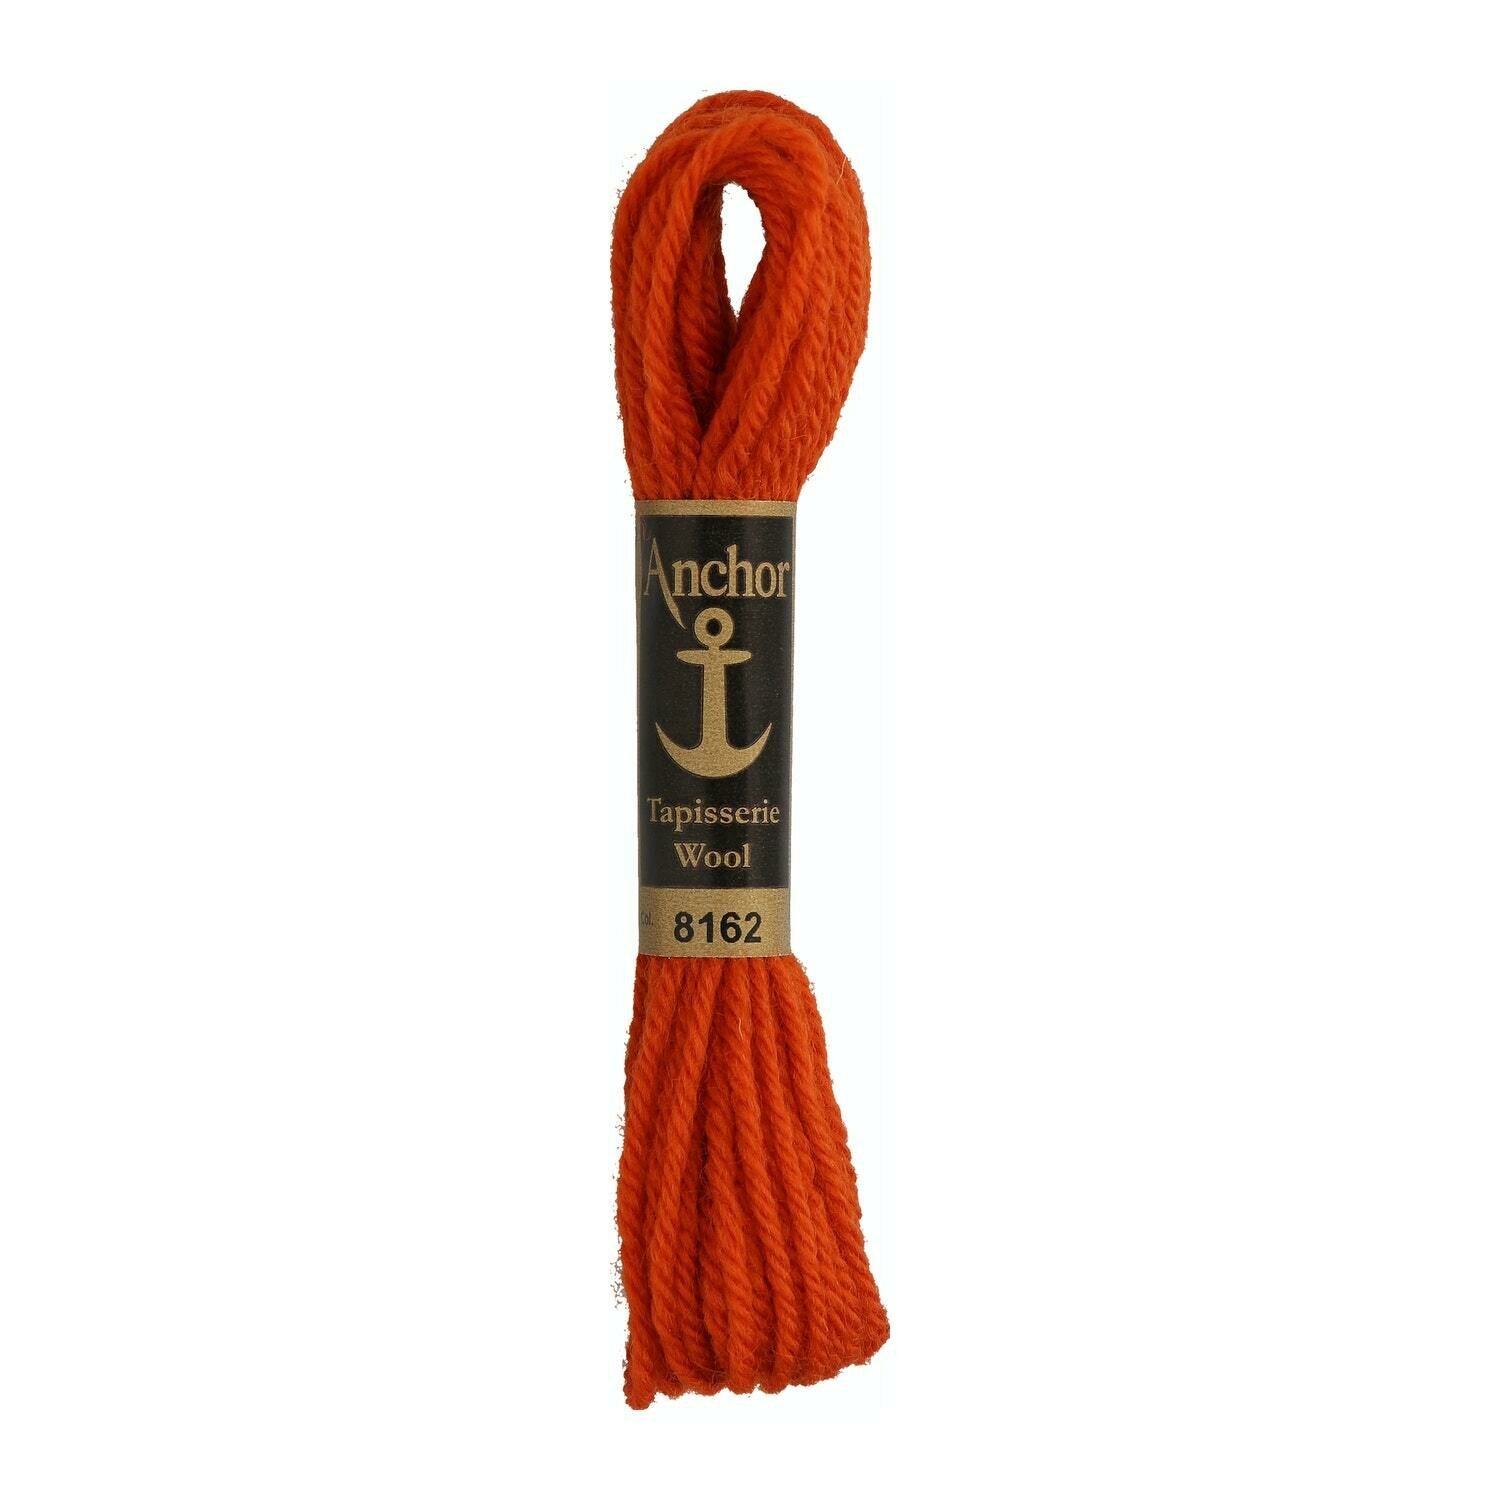 Anchor Tapisserie Wool #  08162